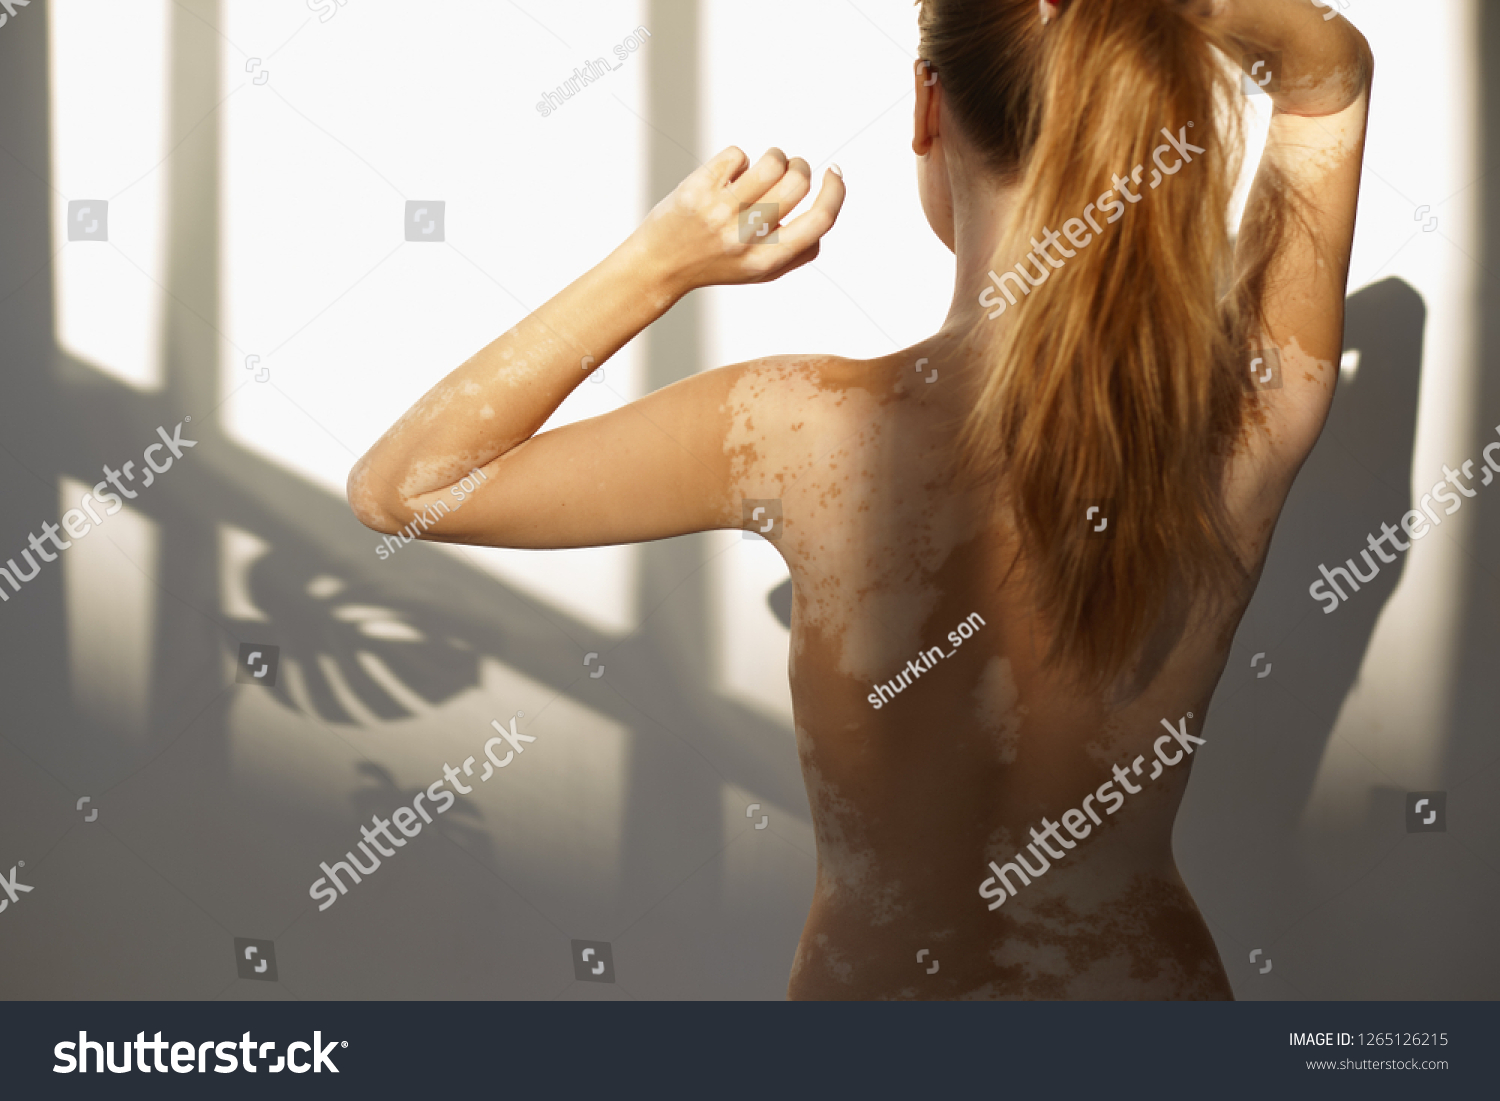 Dark haired girl goes out of shower and shows nude body